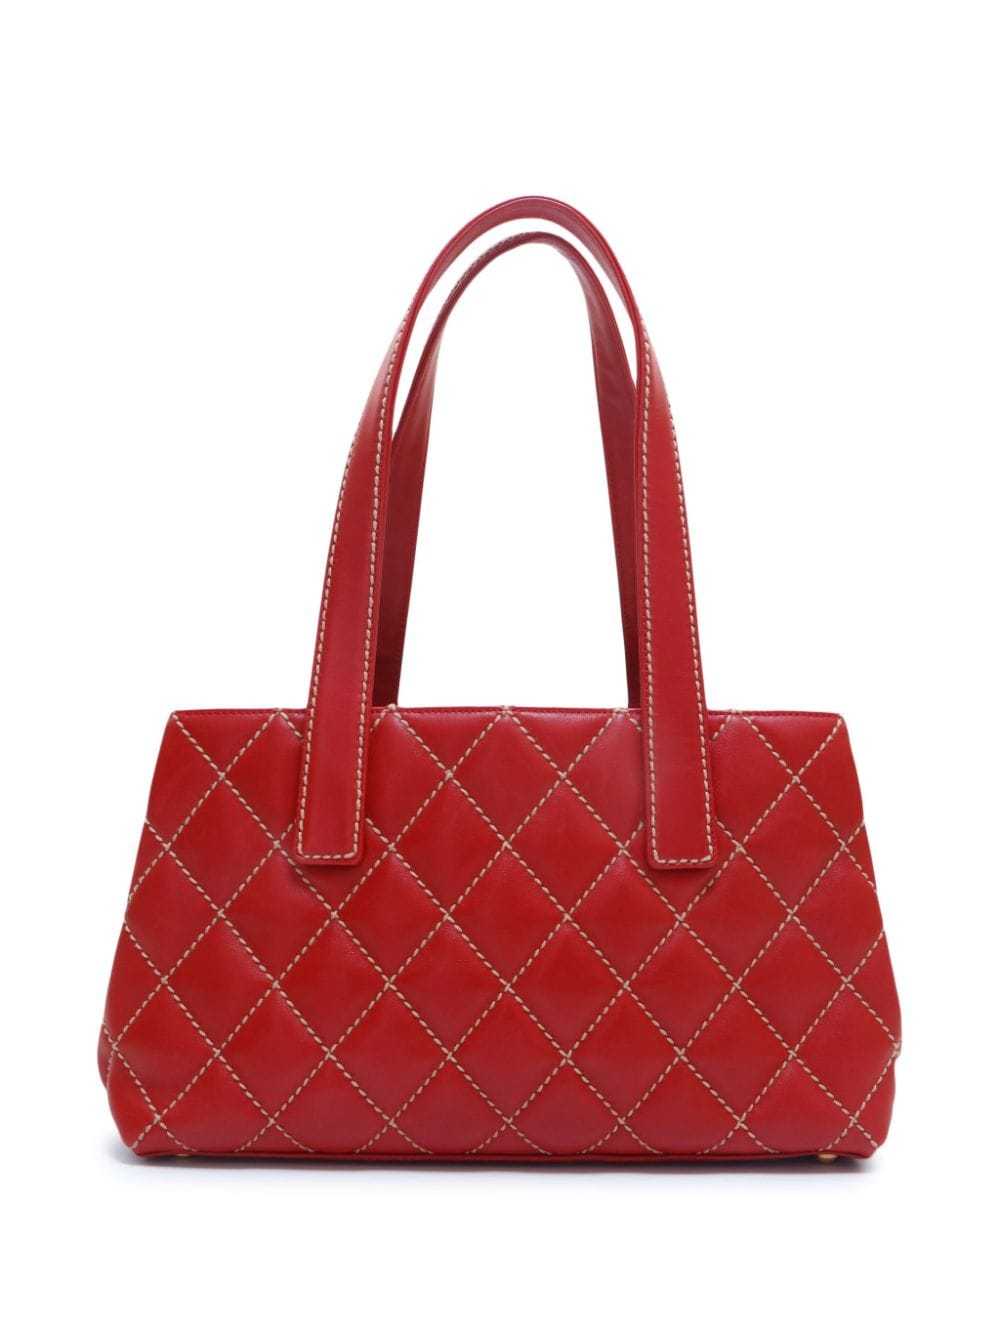 CHANEL Pre-Owned 2002 Wild Stitch tote bag - Red - image 2